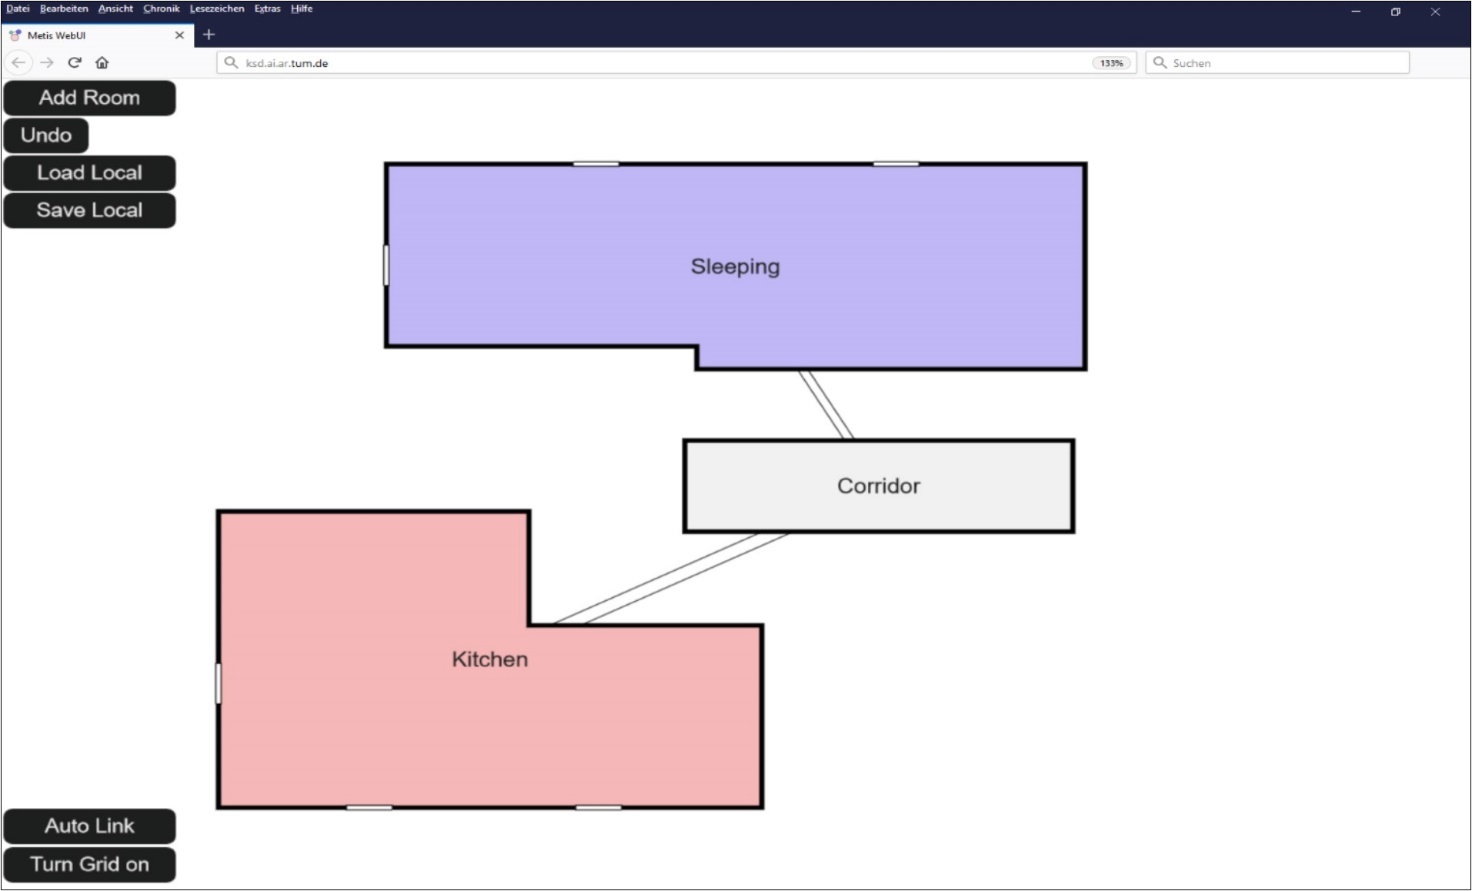  Metis Web UI - software prototype to draw a query with a mouse.